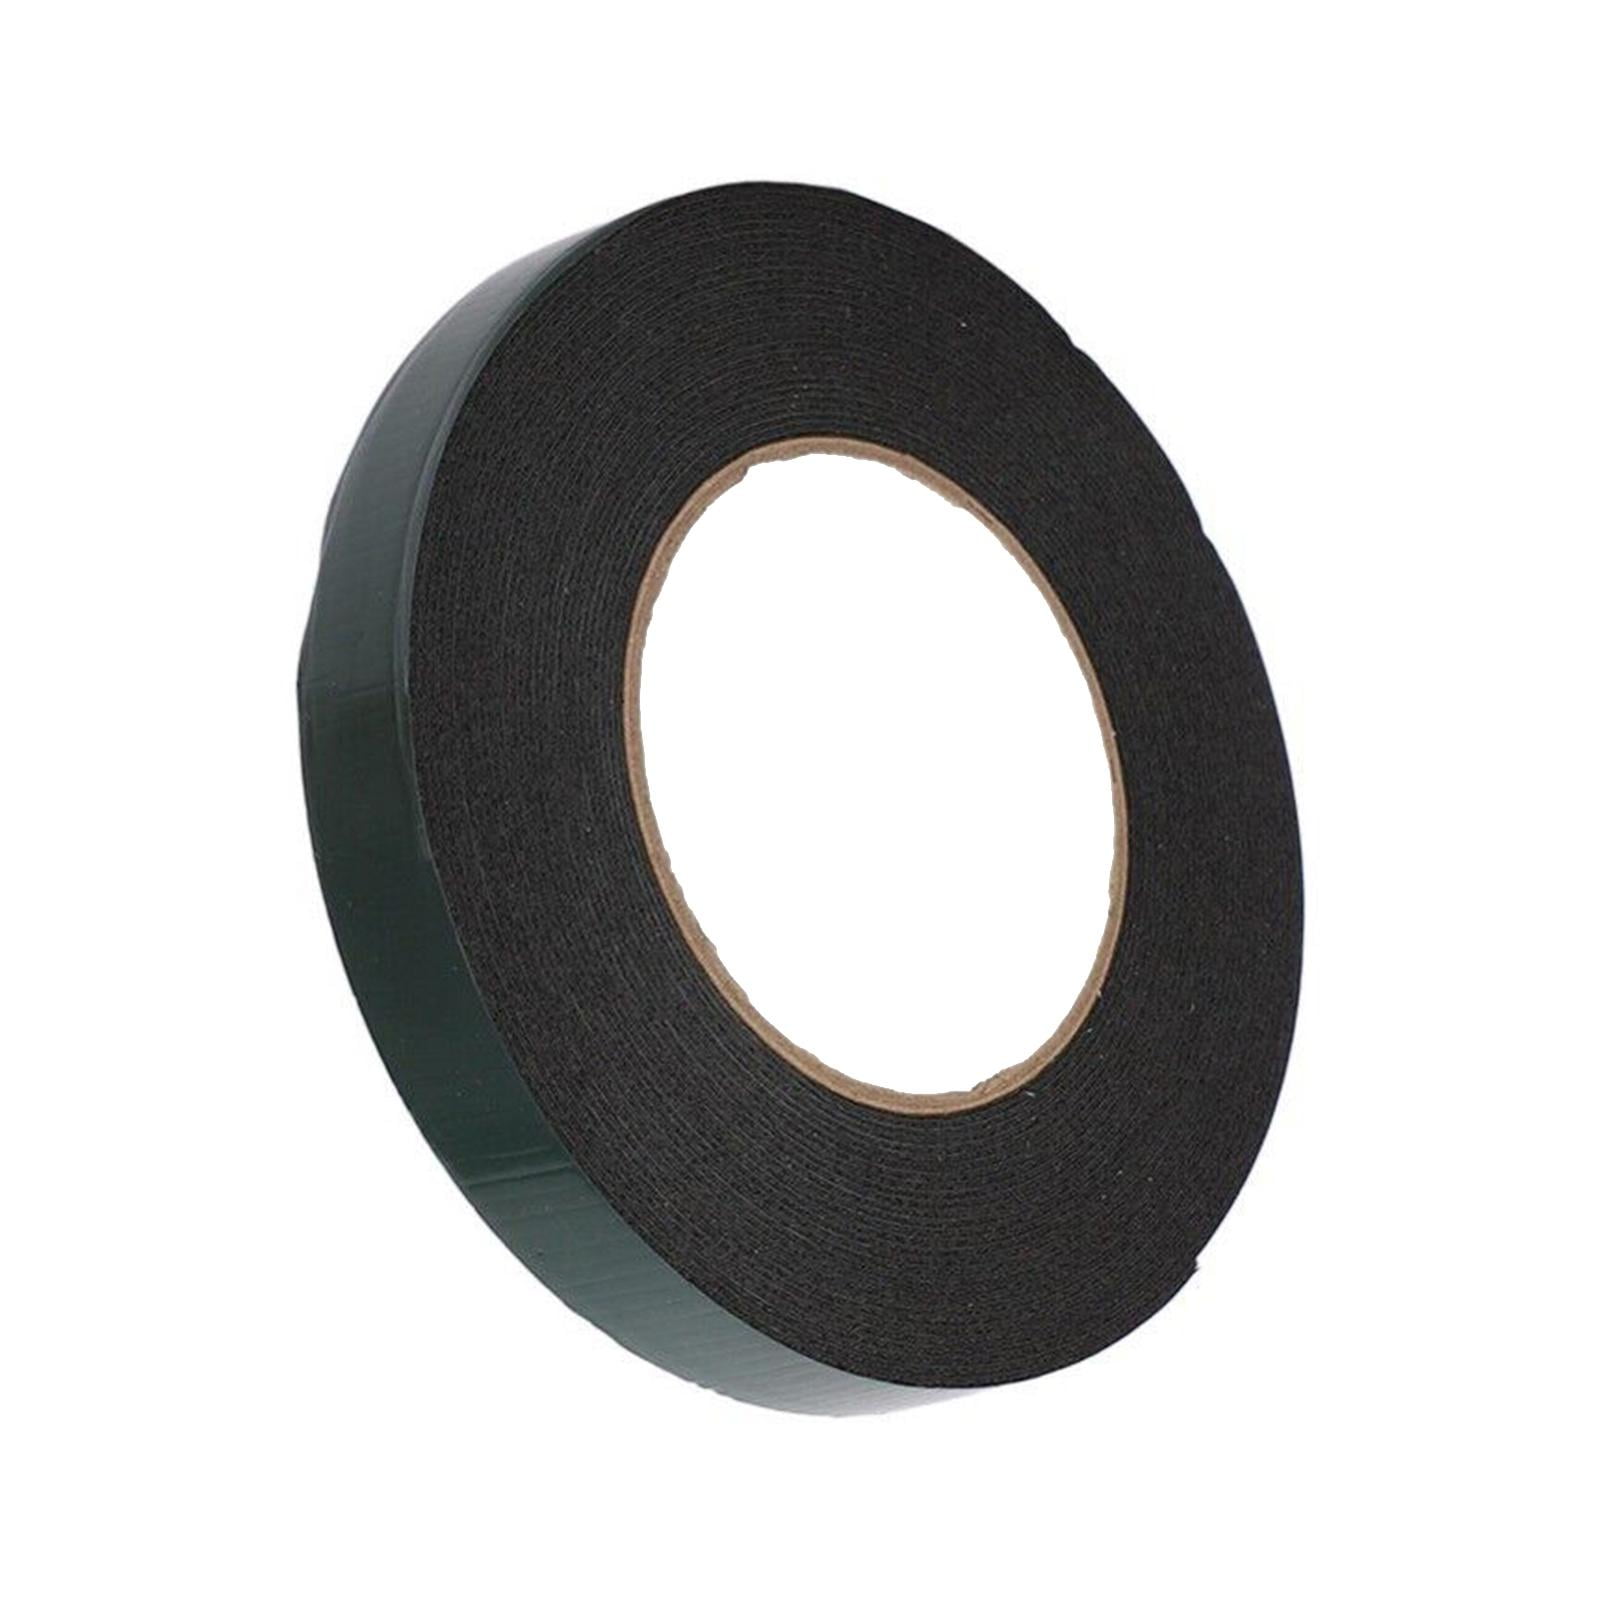 Double Sided Tape Strong Paste Tape Waterproof ,Multipurpose Sticky Tape  Mounting Foam Tape for Automotive Wall Office Decor ,Car Picture Thickness  5mm 